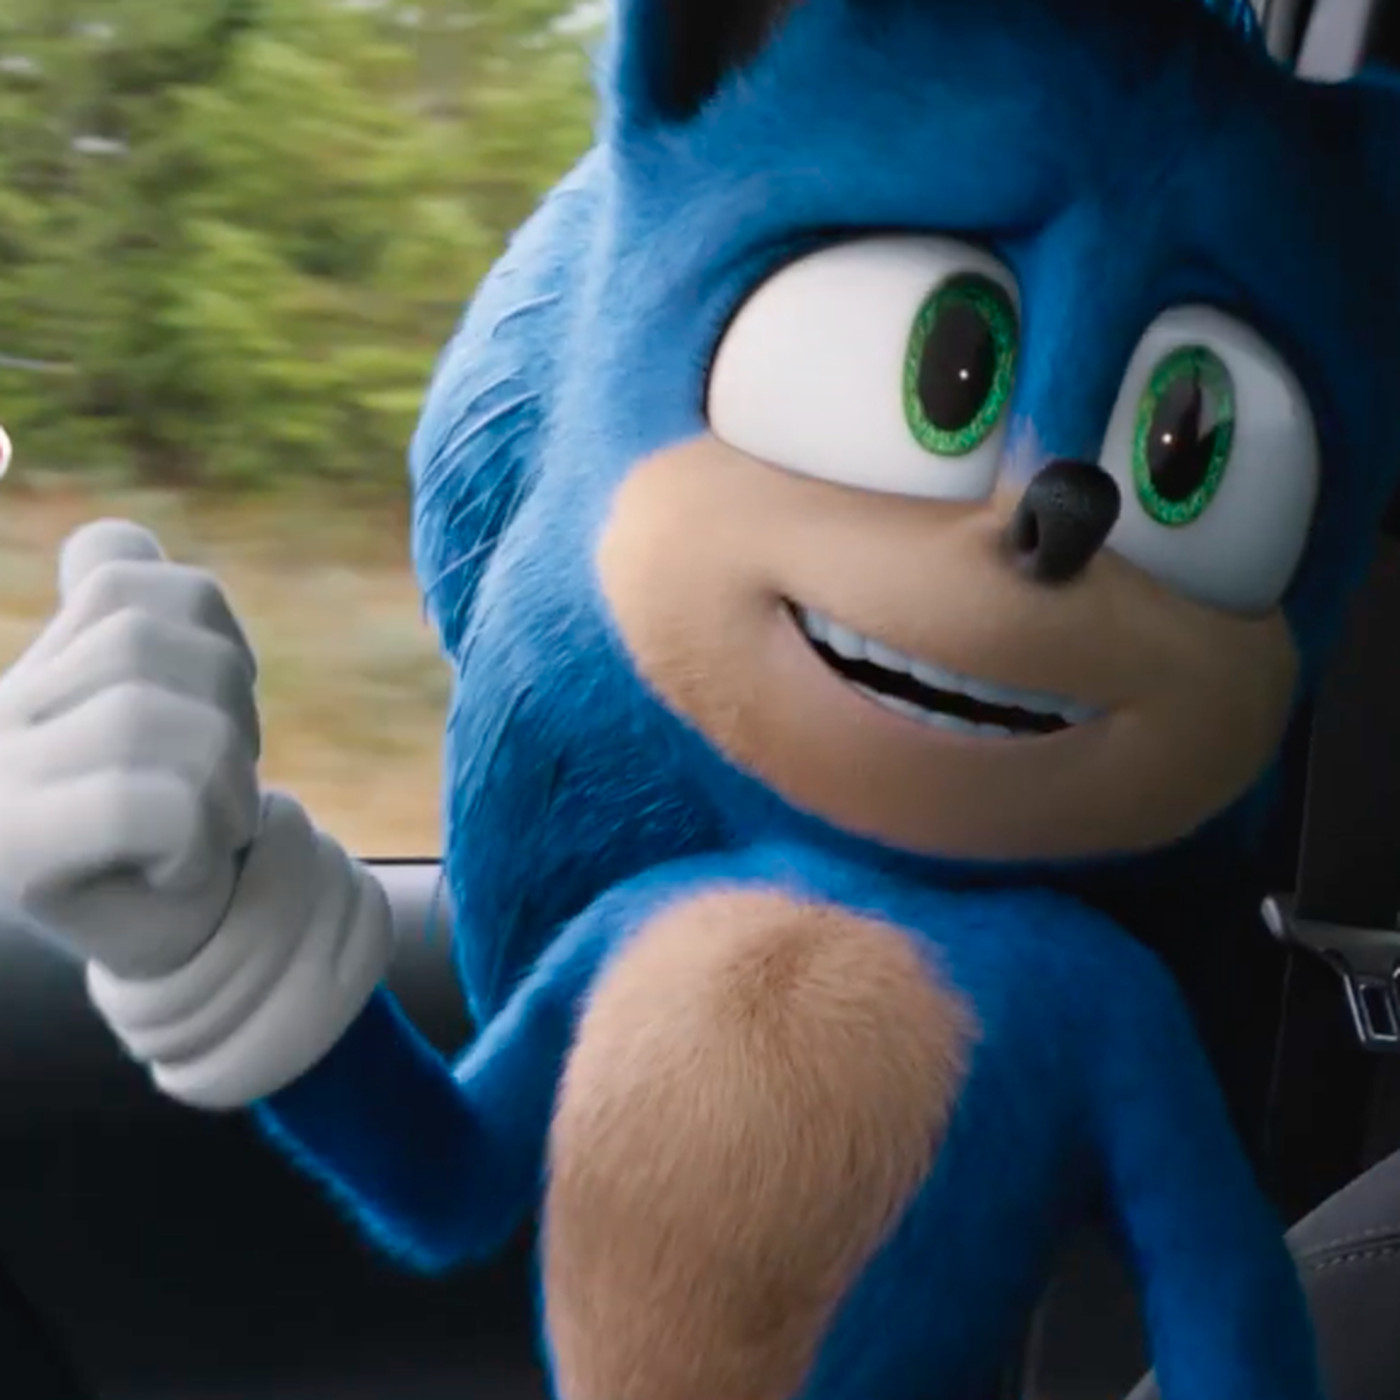 Sonic the Hedgehog has the biggest opening weekend of any video game movie  - Polygon